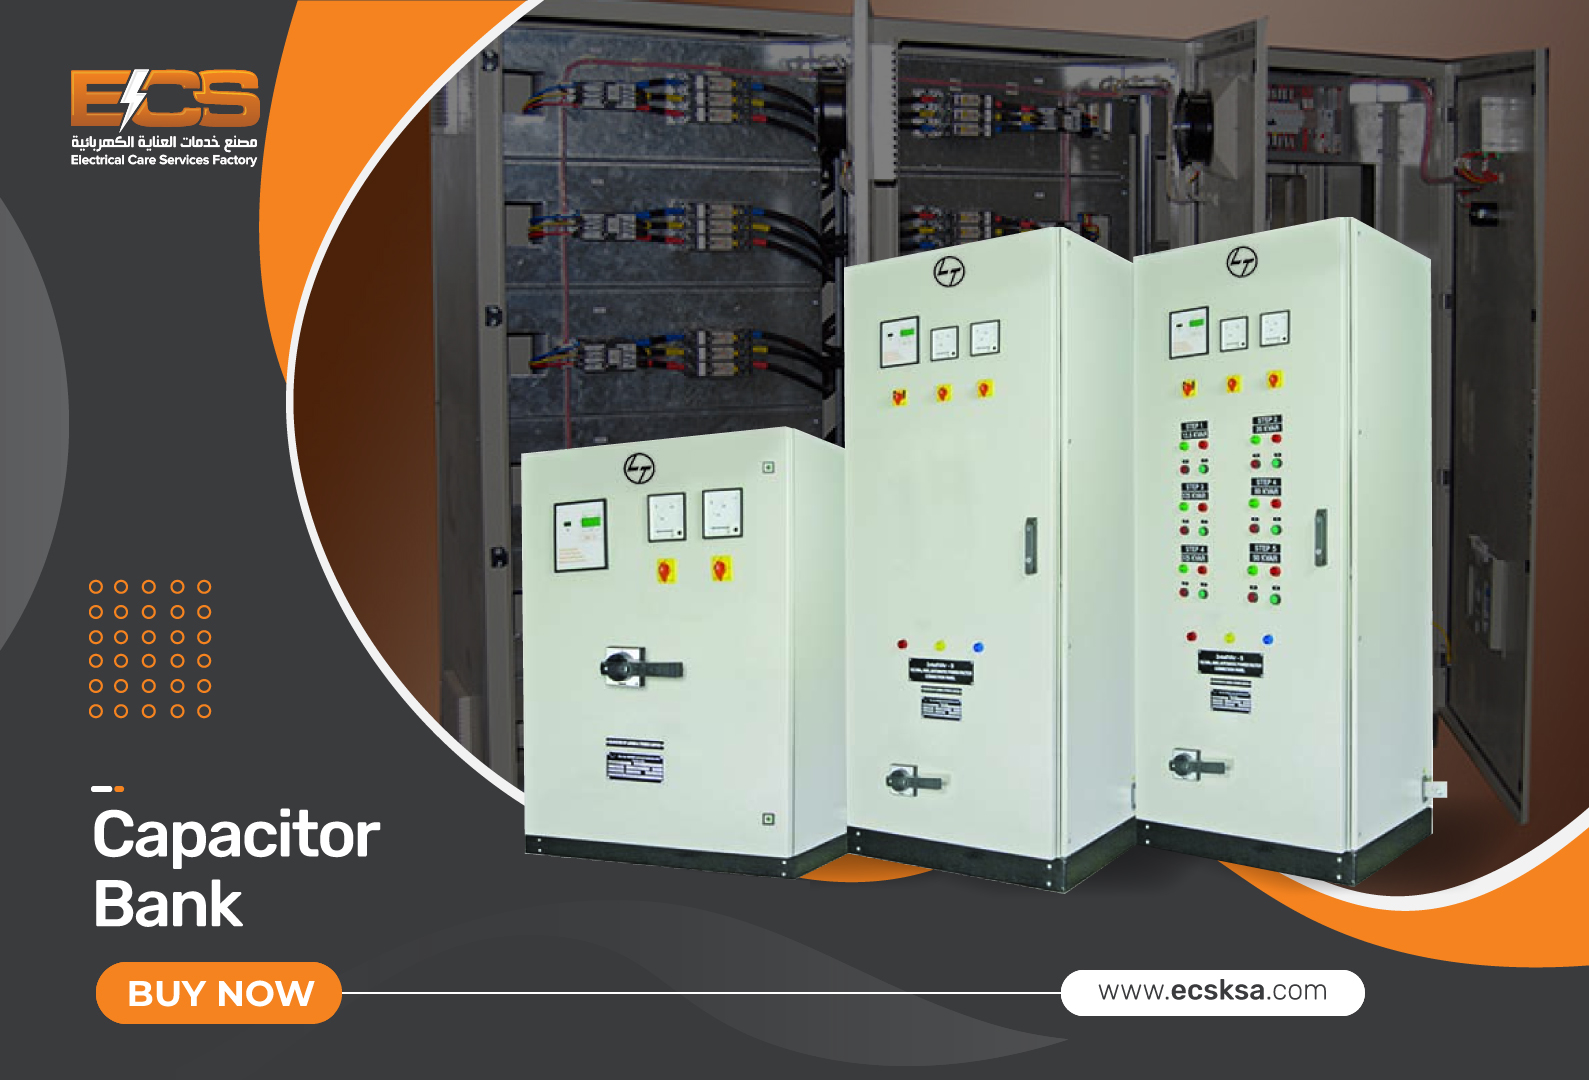 What is Capacitor Bank